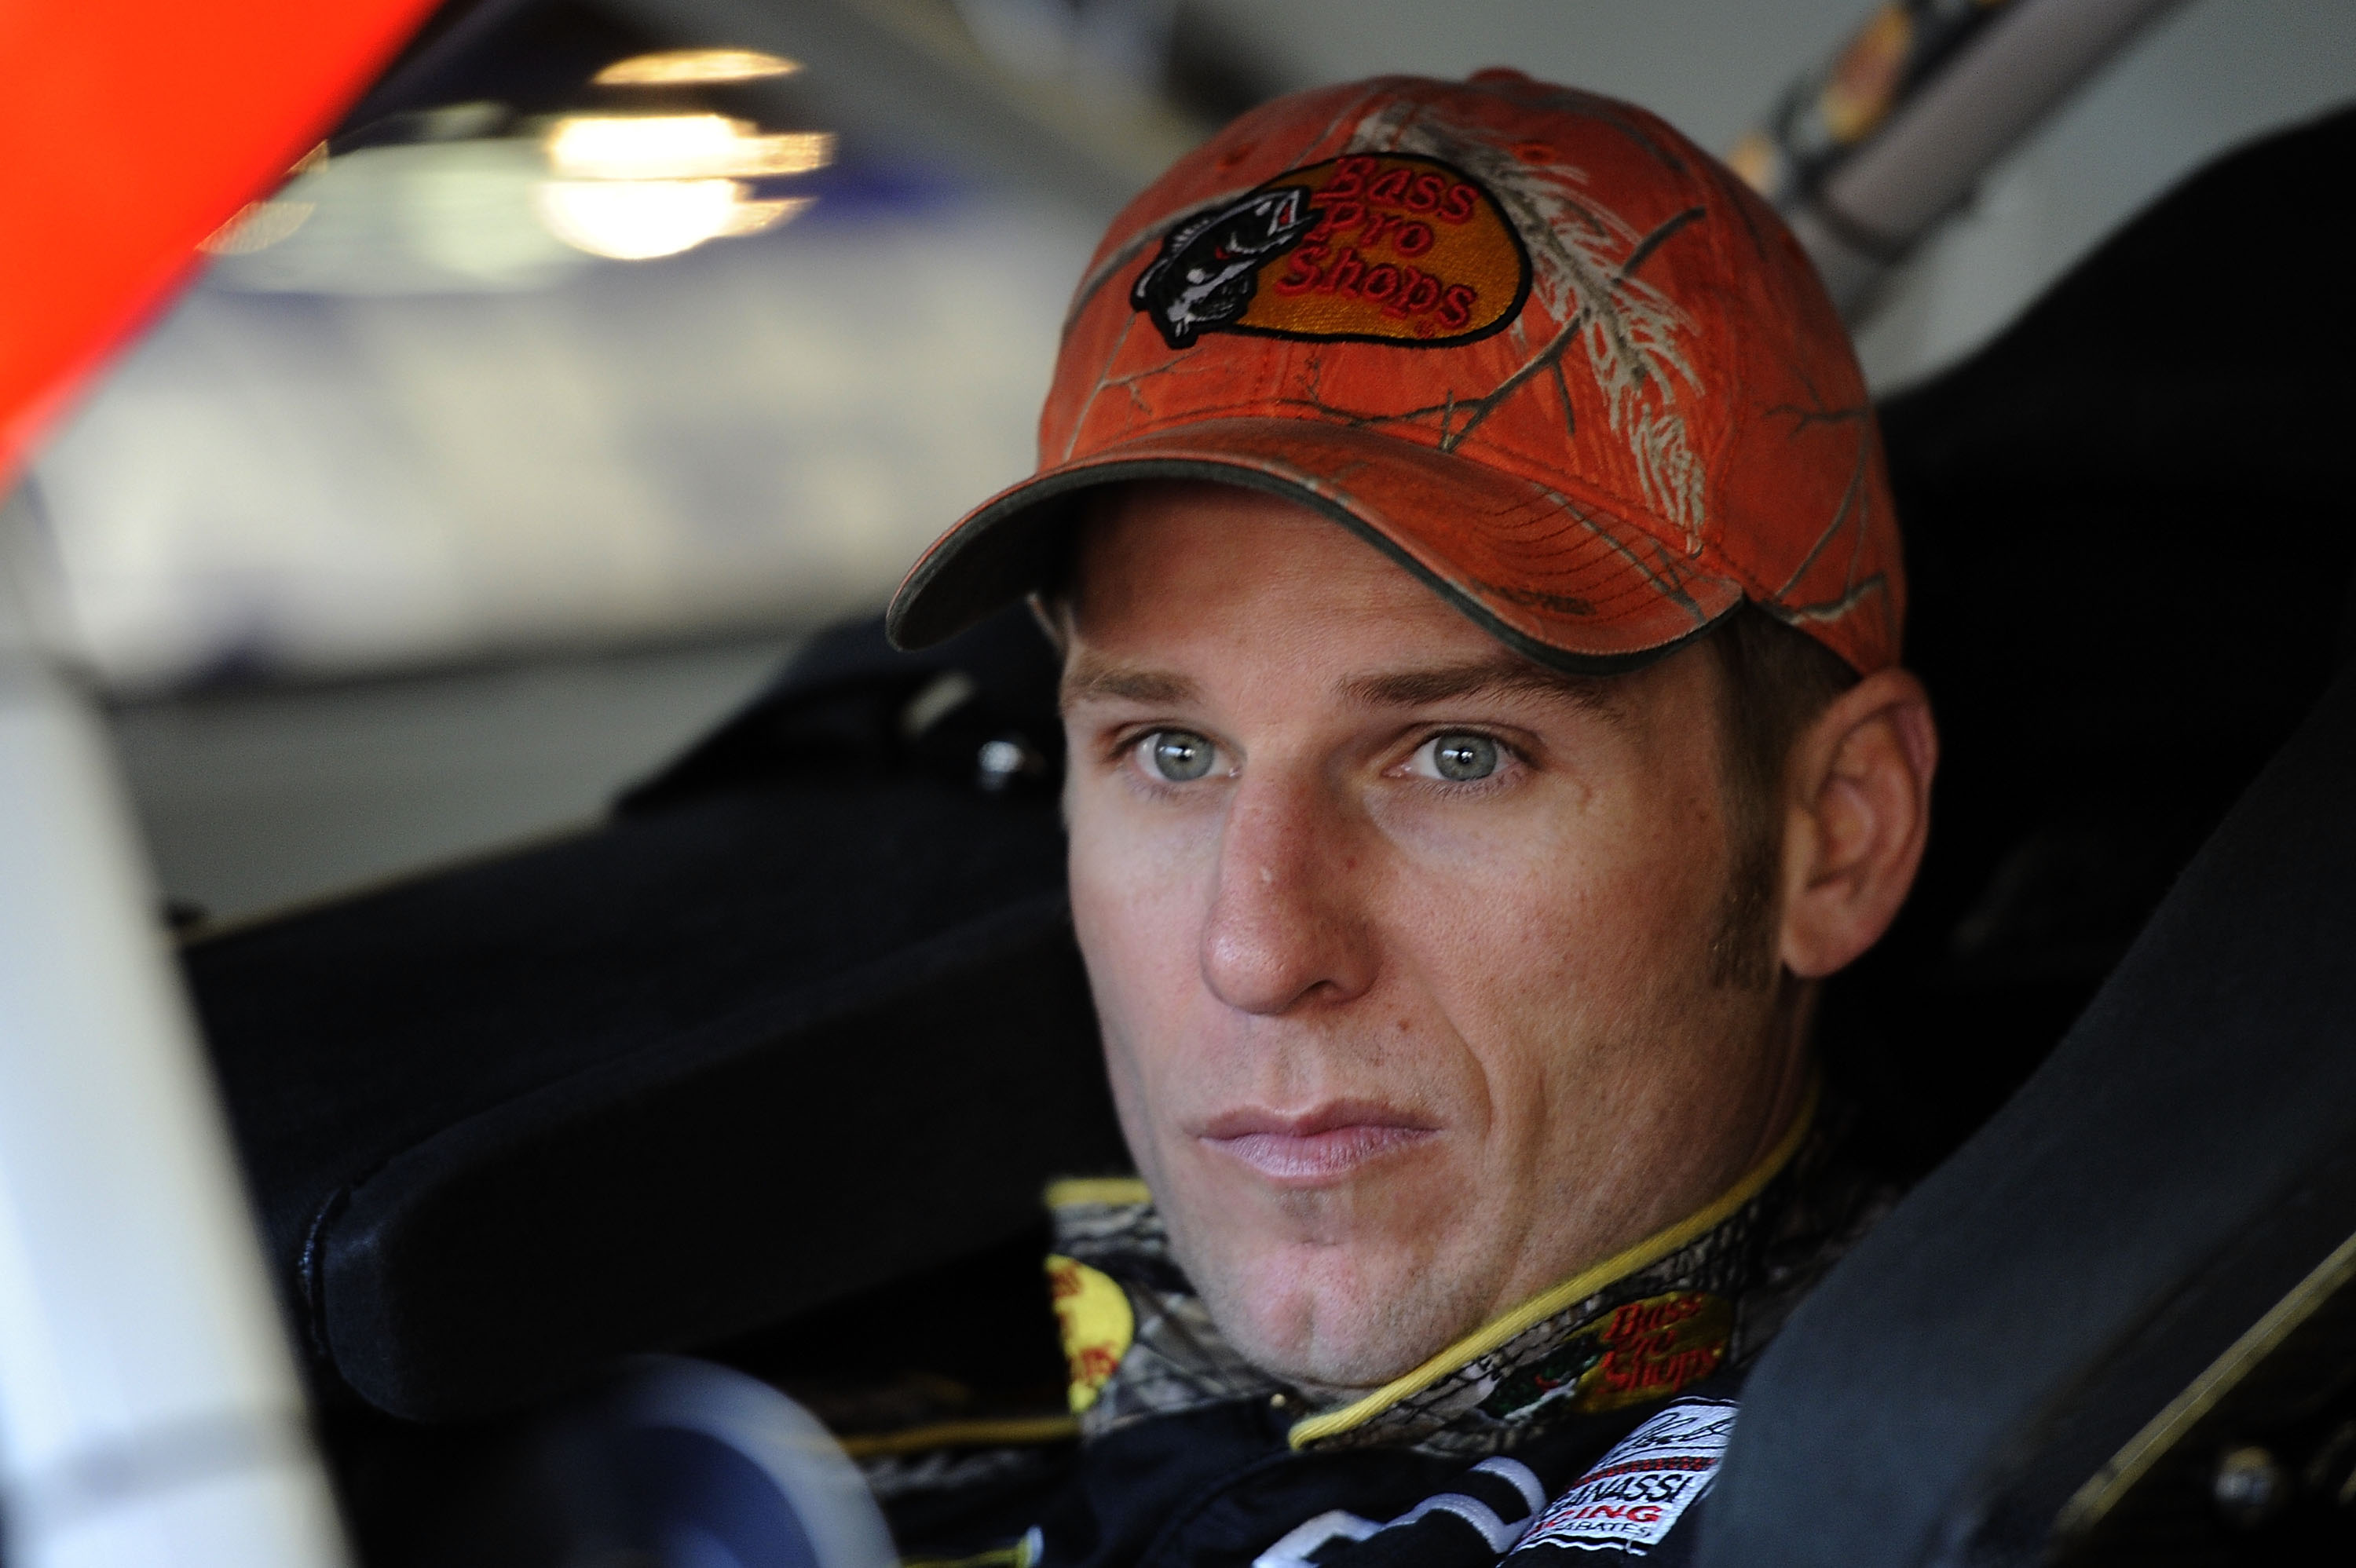 FORT WORTH, TX - NOVEMBER 06:  Jamie McMurray, driver of the #1 Bass Pro Shops/Arctic Cat Chevrolet, sits in his car in the garage area during practice for the NASCAR Sprint Cup Series AAA Texas 500 at Texas Motor Speedway on November 6, 2010 in Fort Wort